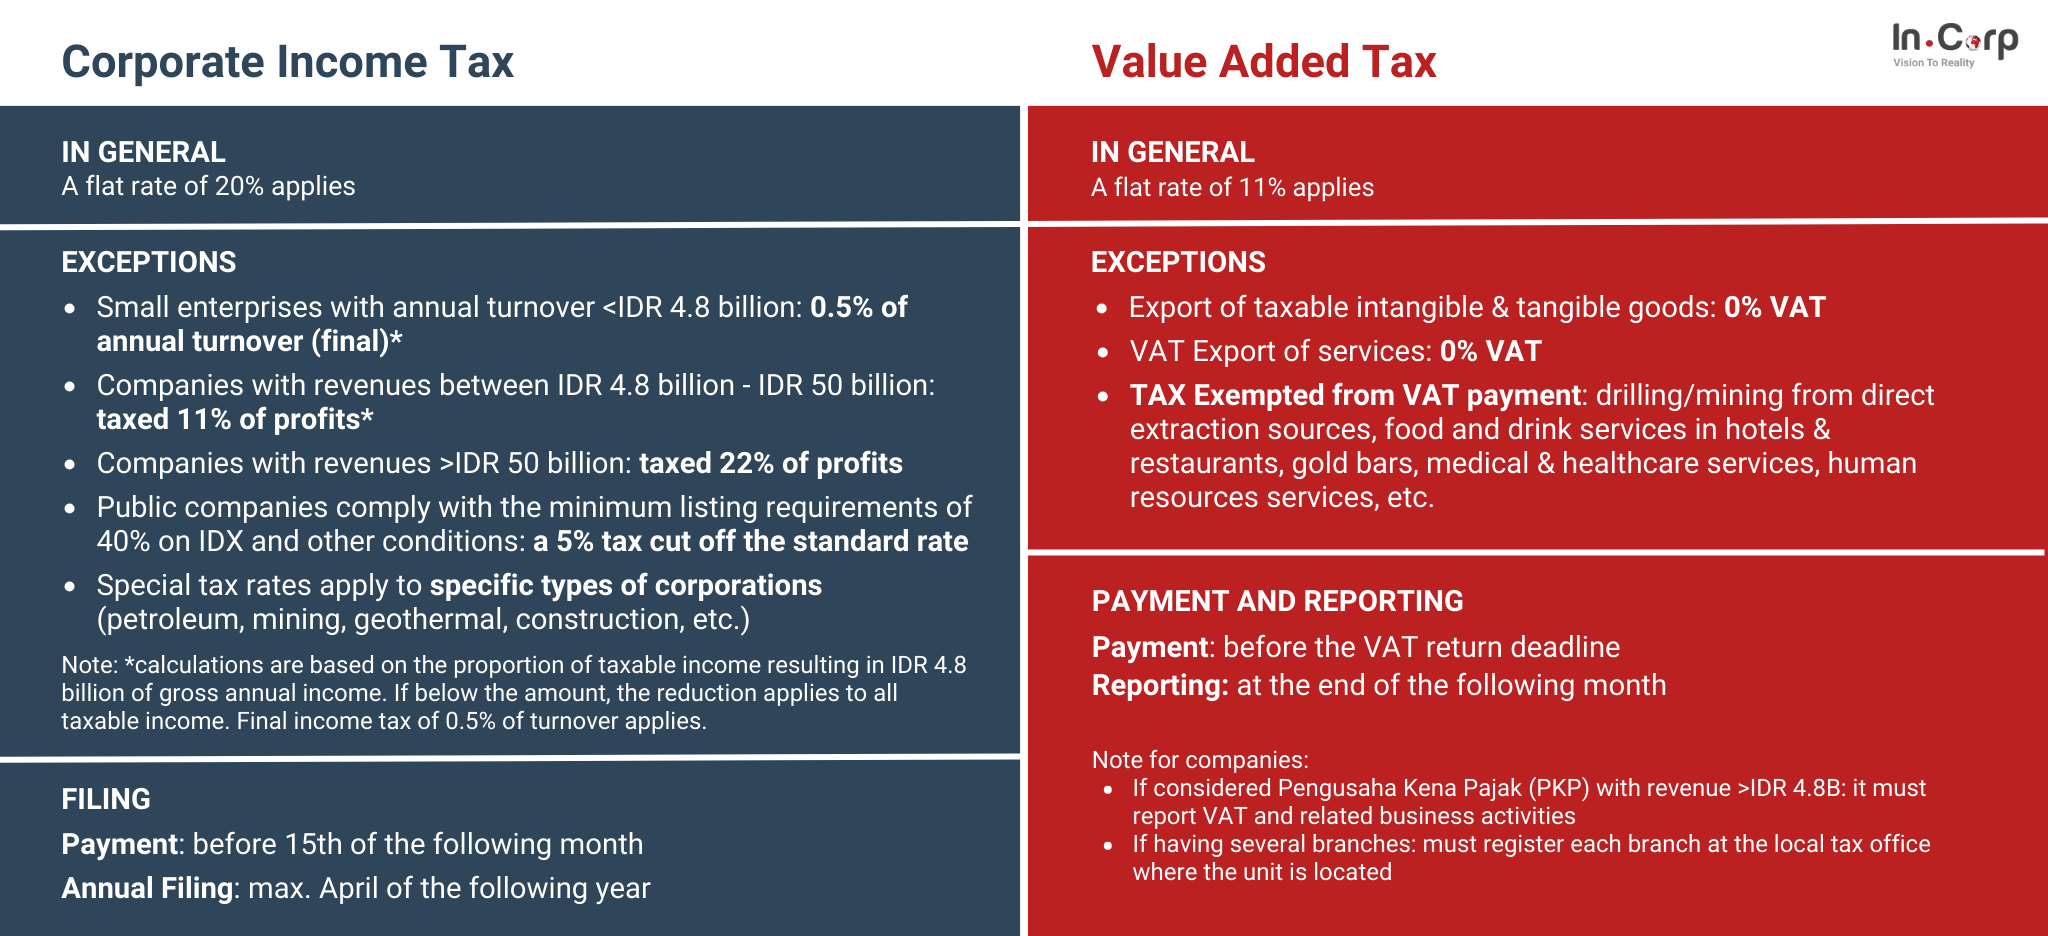 Guide to value added tax (VAT) in Indonesia